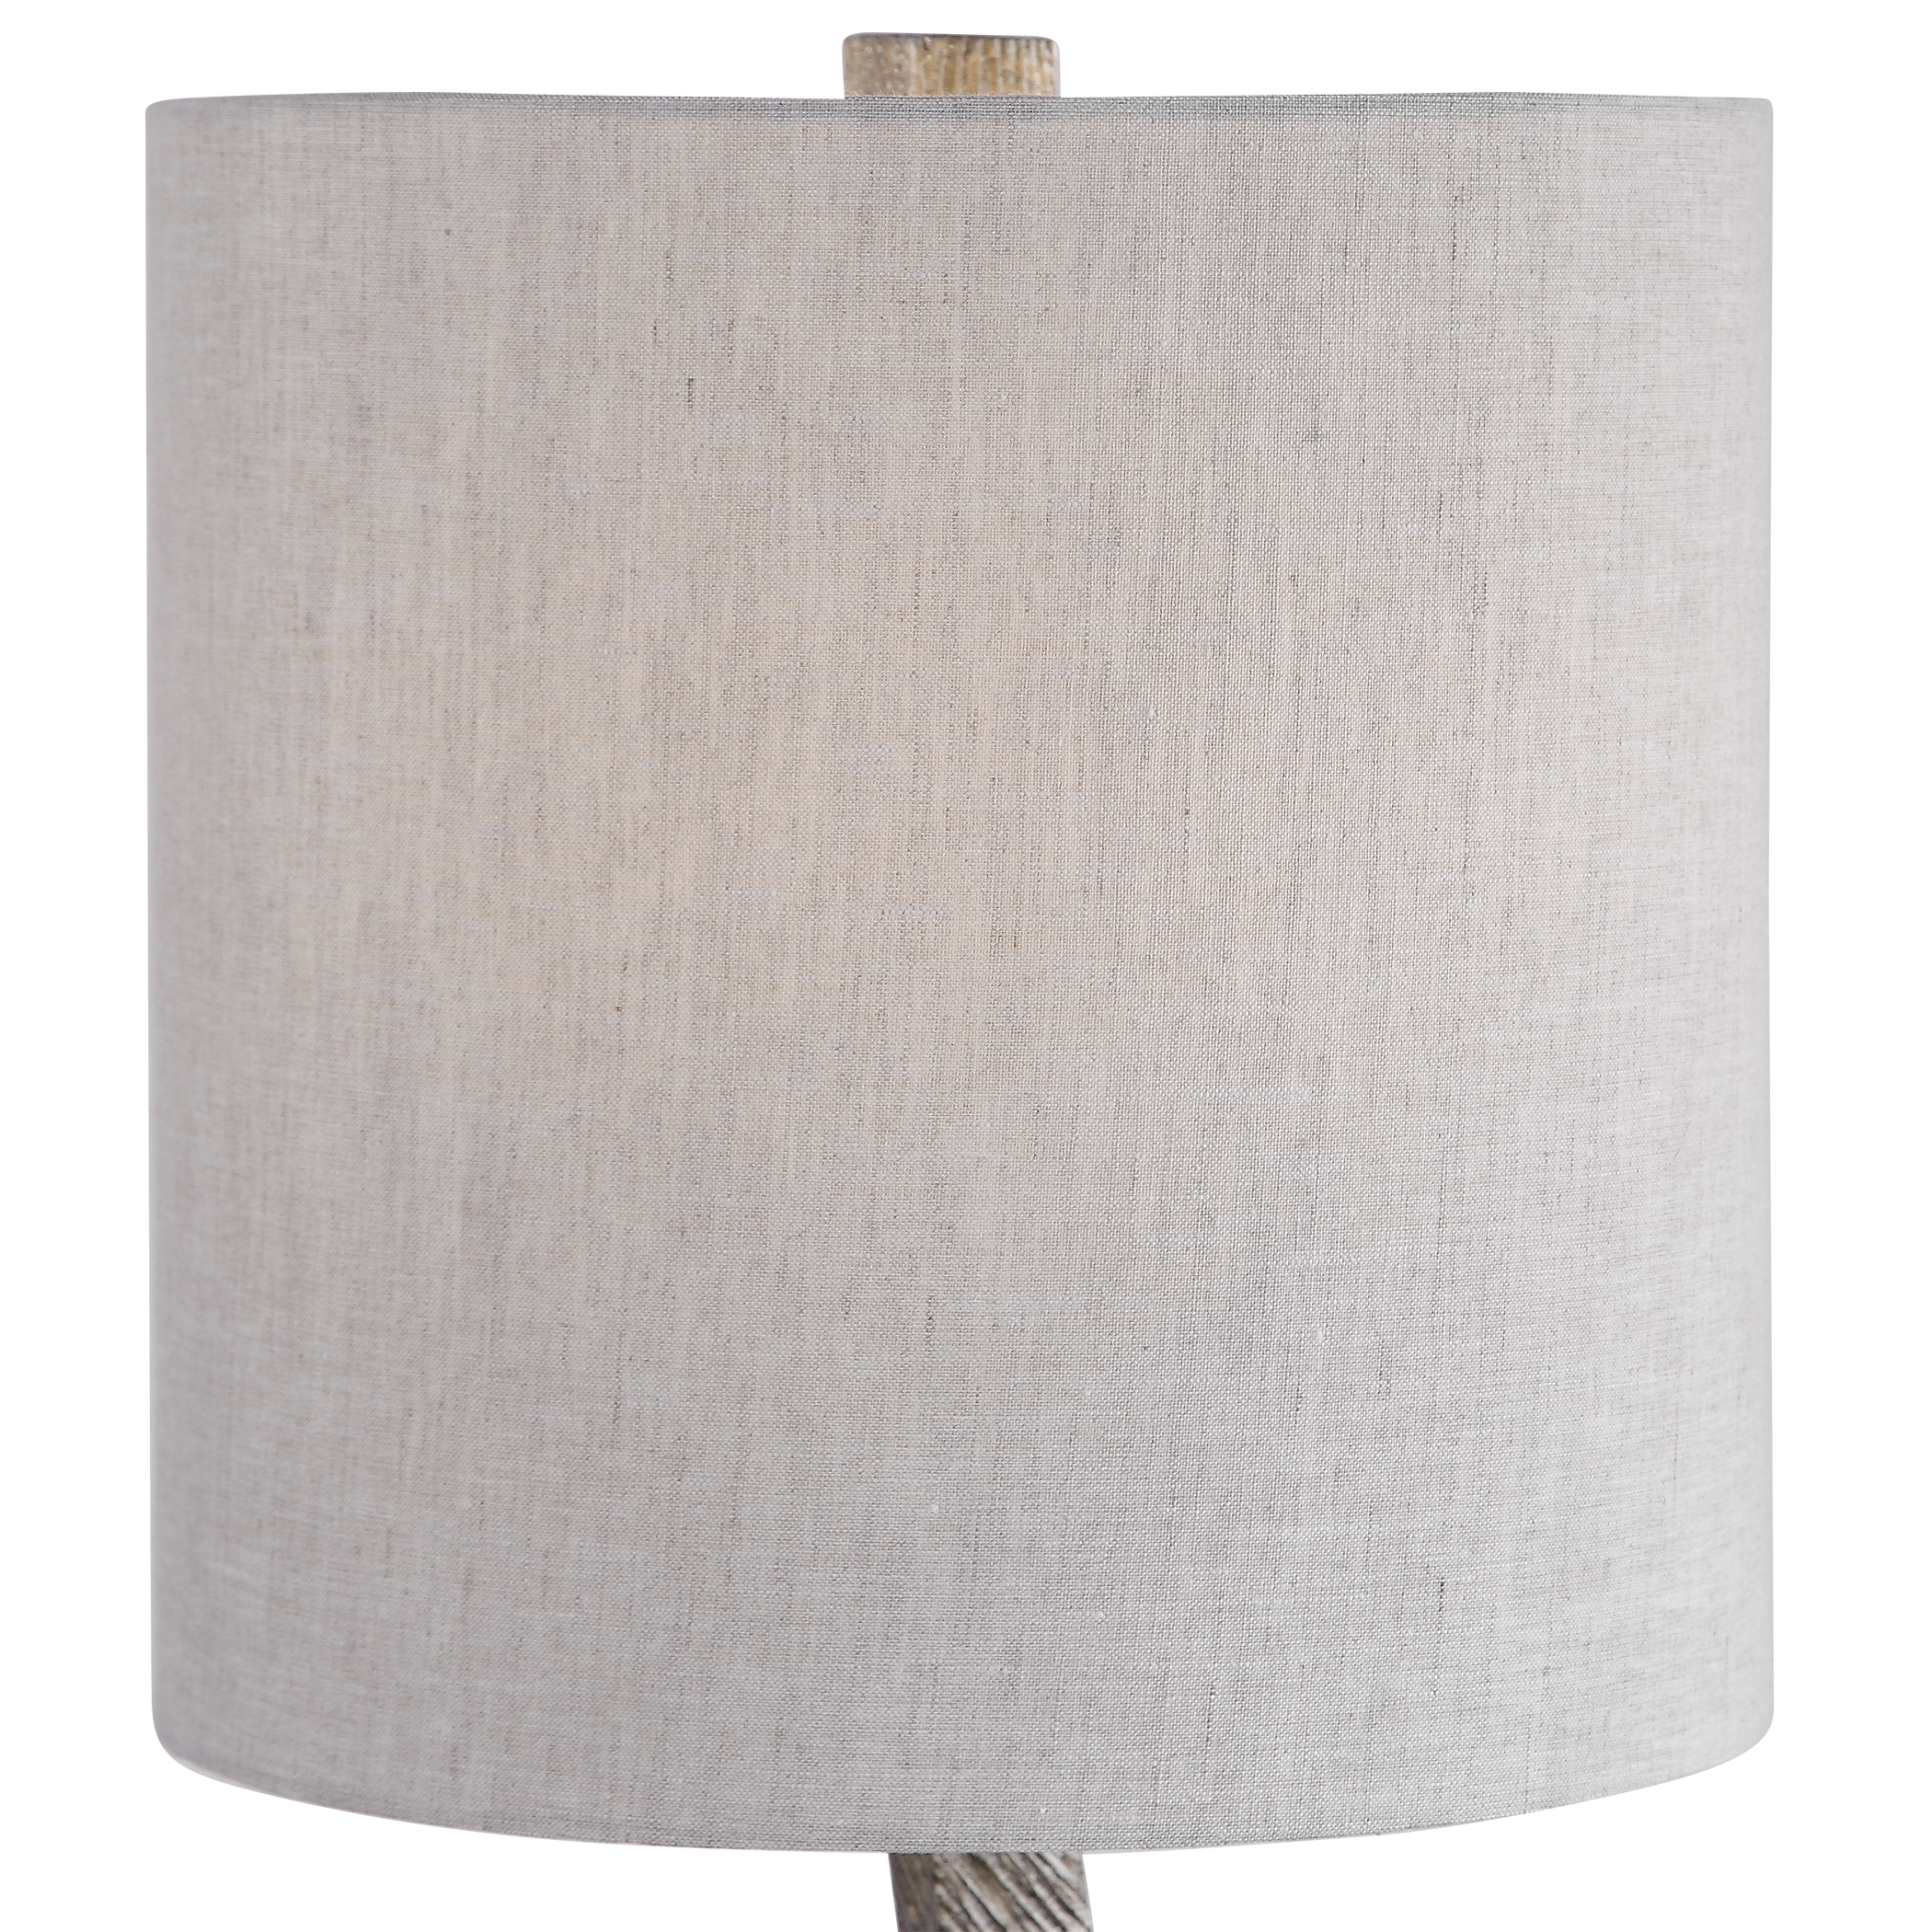 Iver Branch Accent Lamp - Image 5